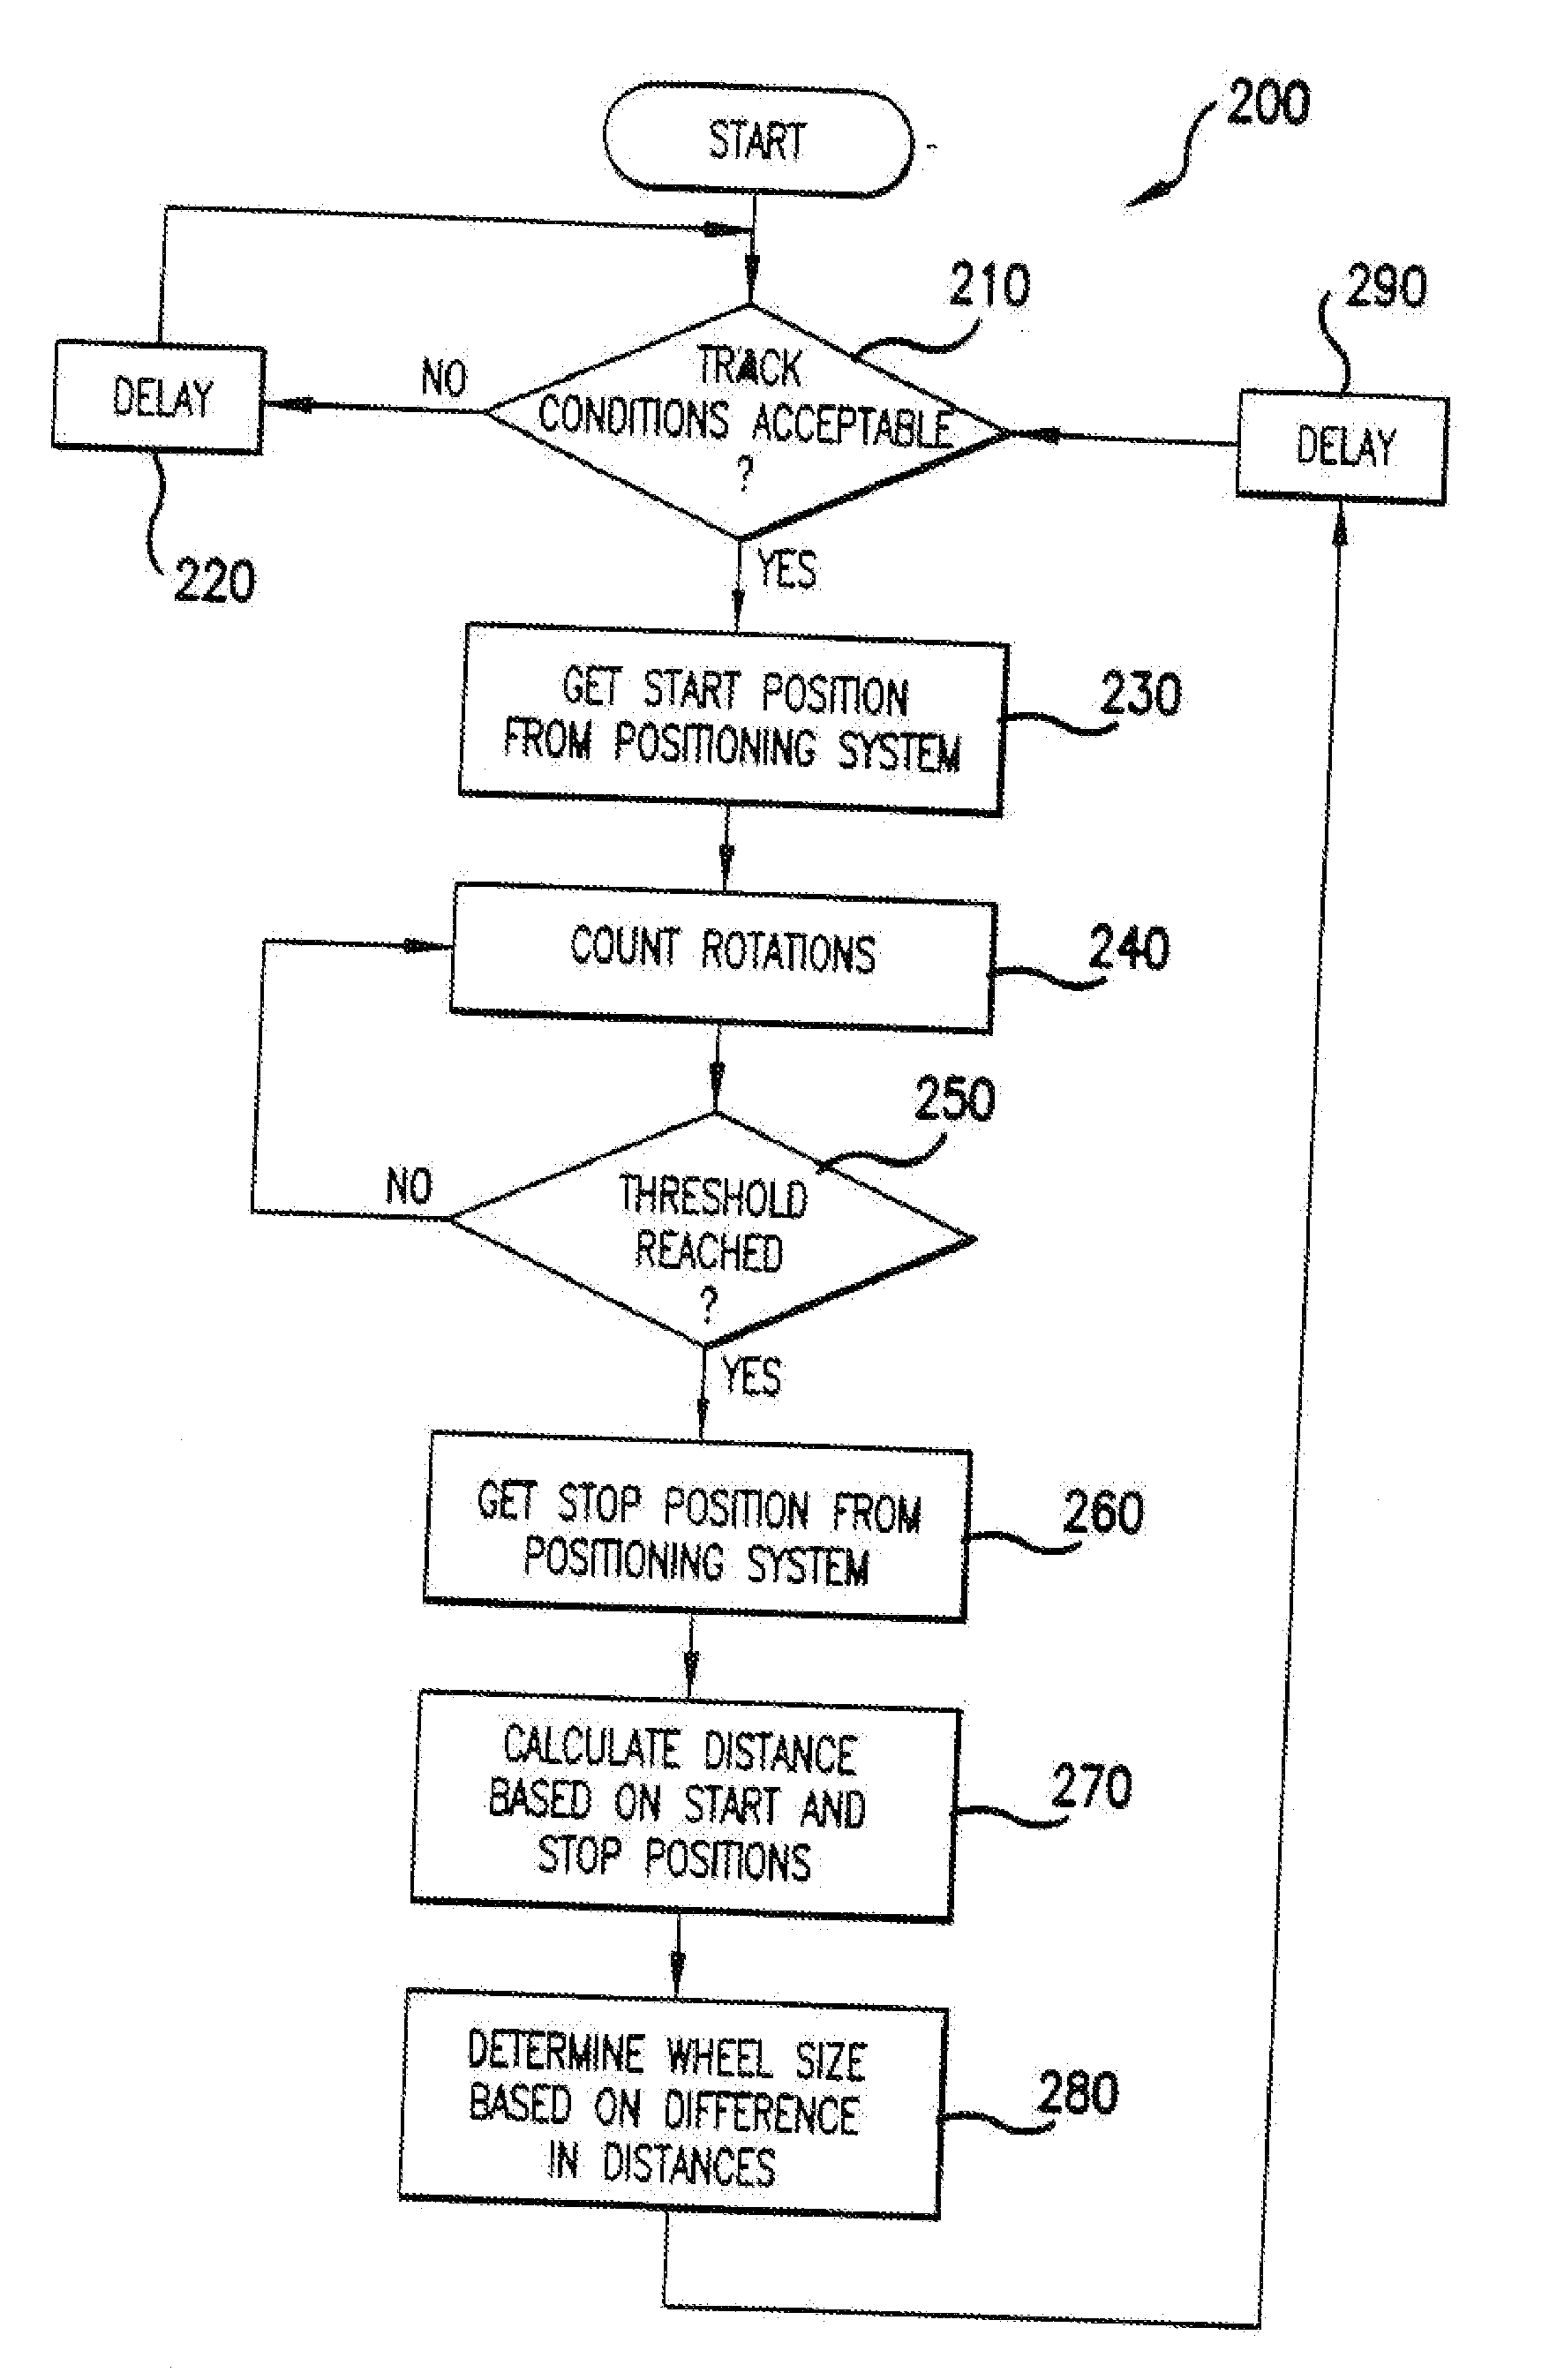 Method and System for Compensating for Wheel Wear on a Train